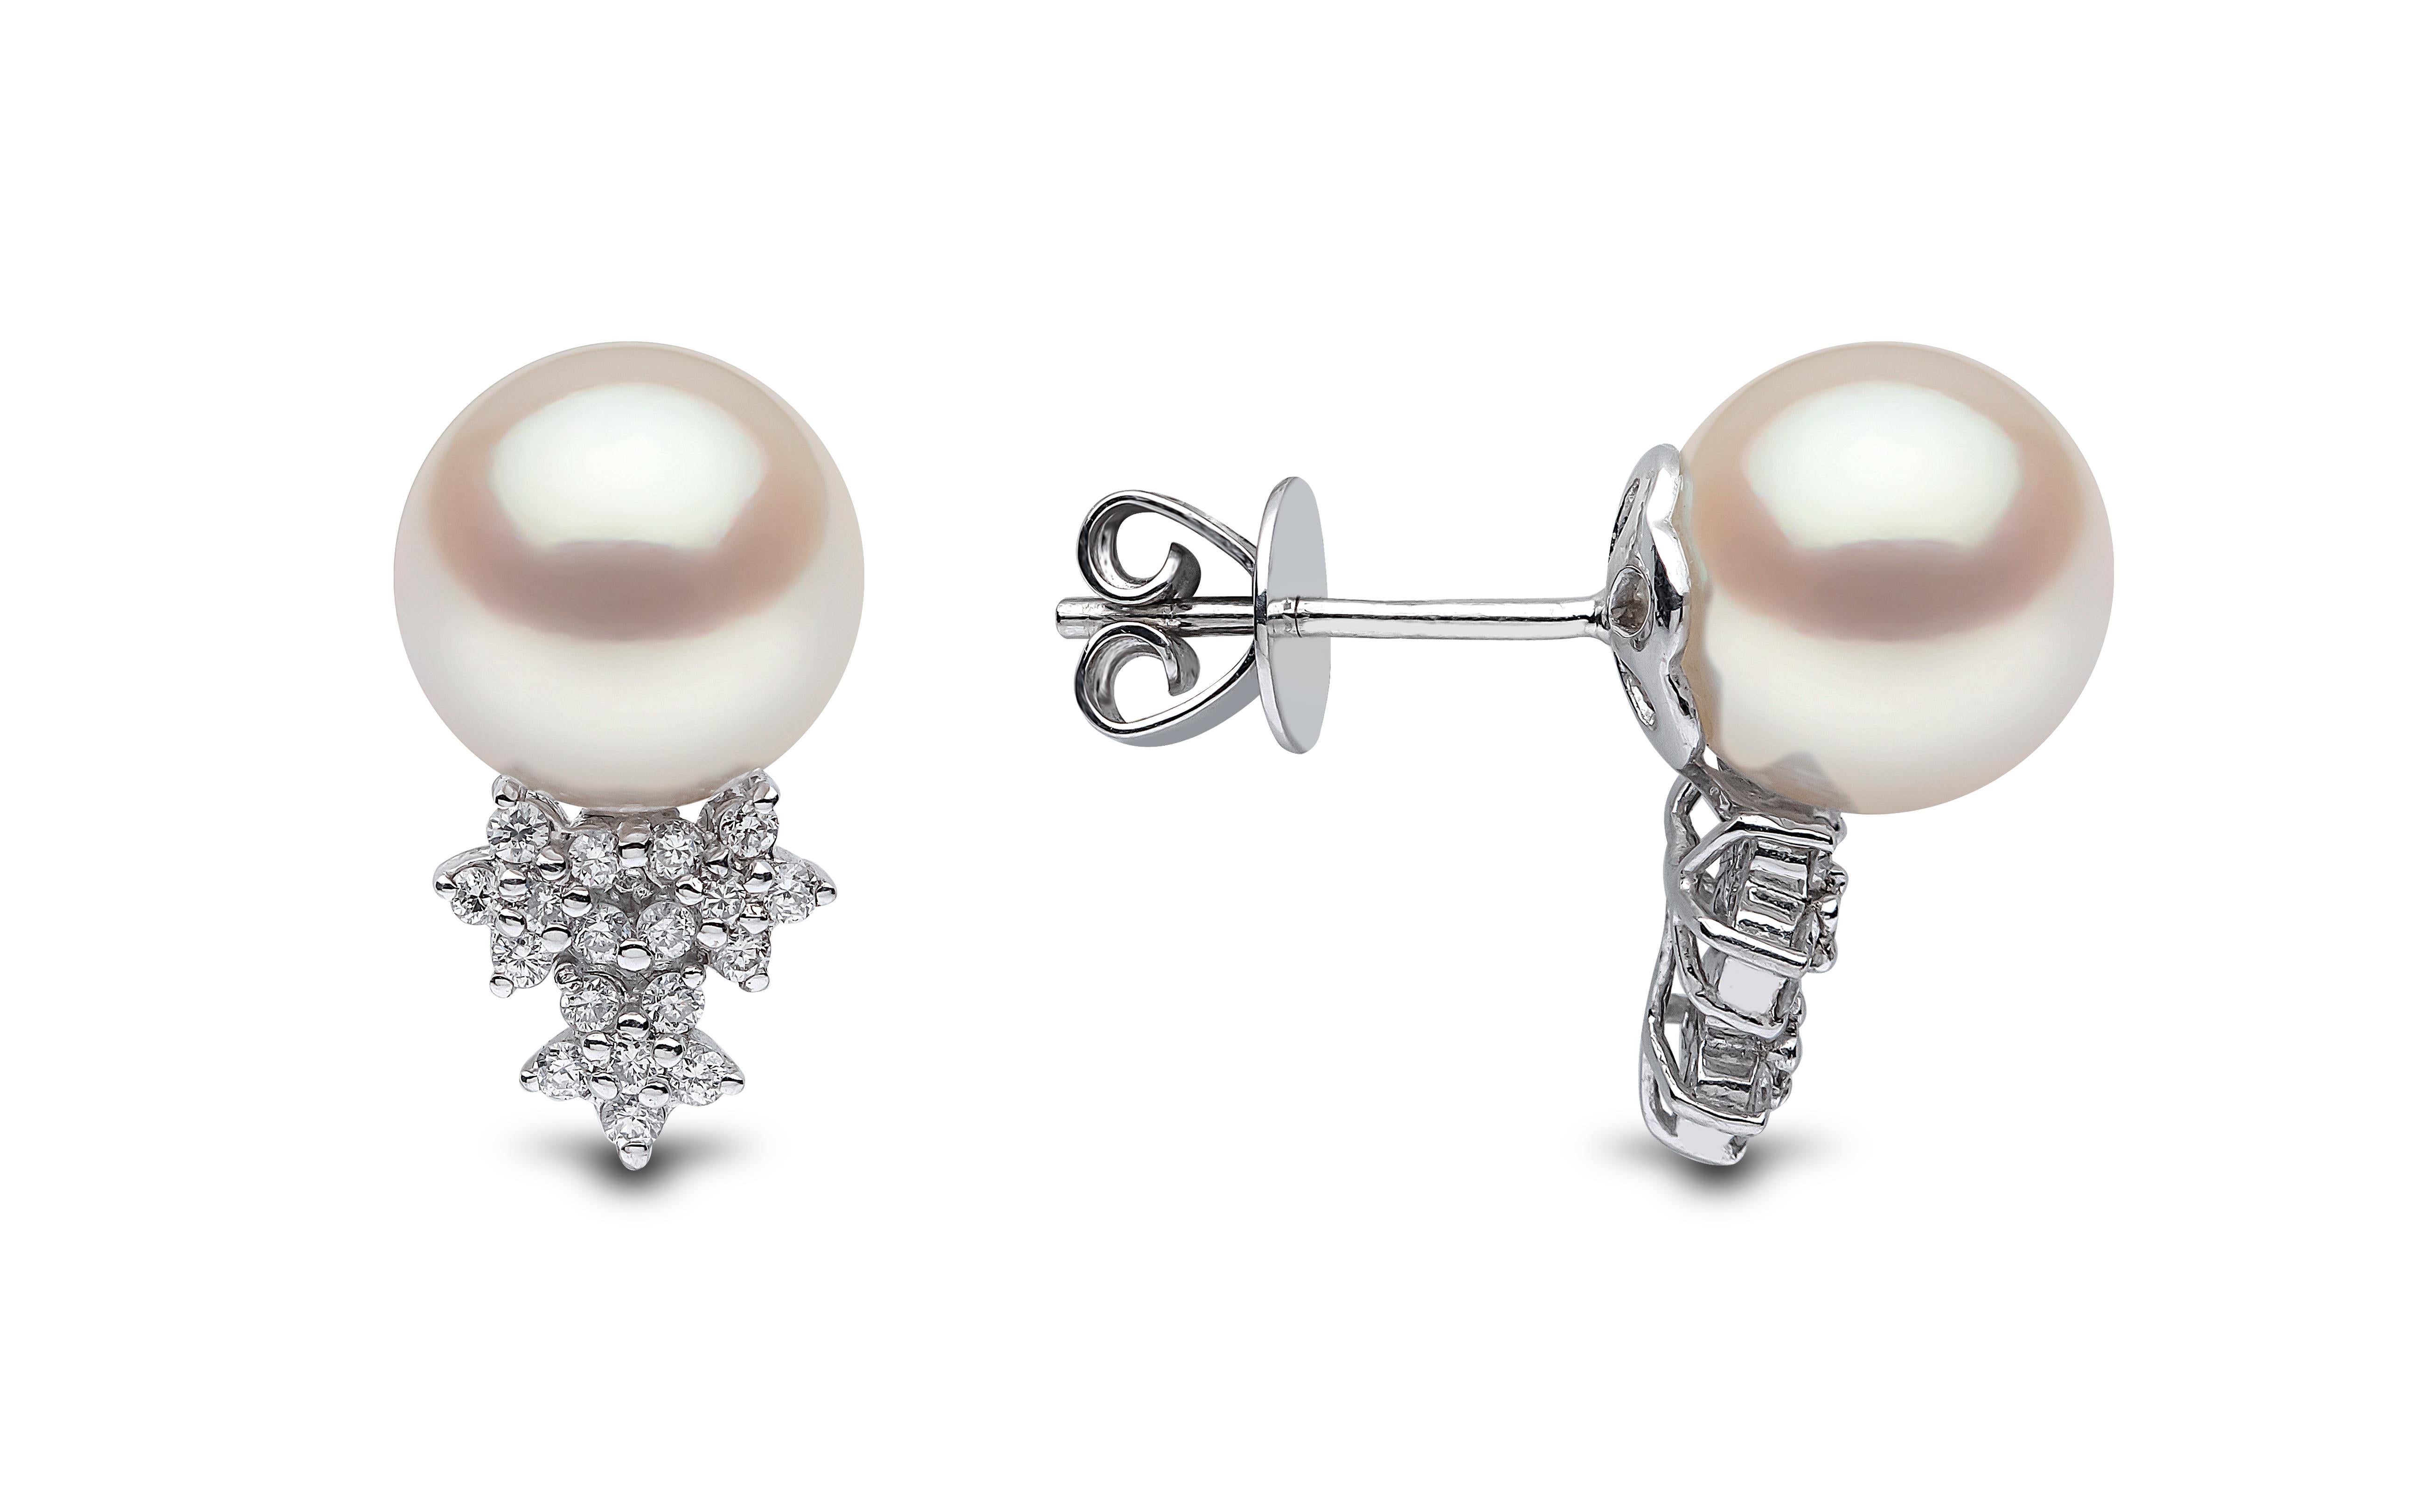 An elegant stud by Yoko London featuring South Sea Pearls accentuated by three stars of diamonds. Perfect for any occasion, these earrings are a timeless addition to any wardrobe. Matching pendant is available.
-10-10.5mm Cultured Australian South